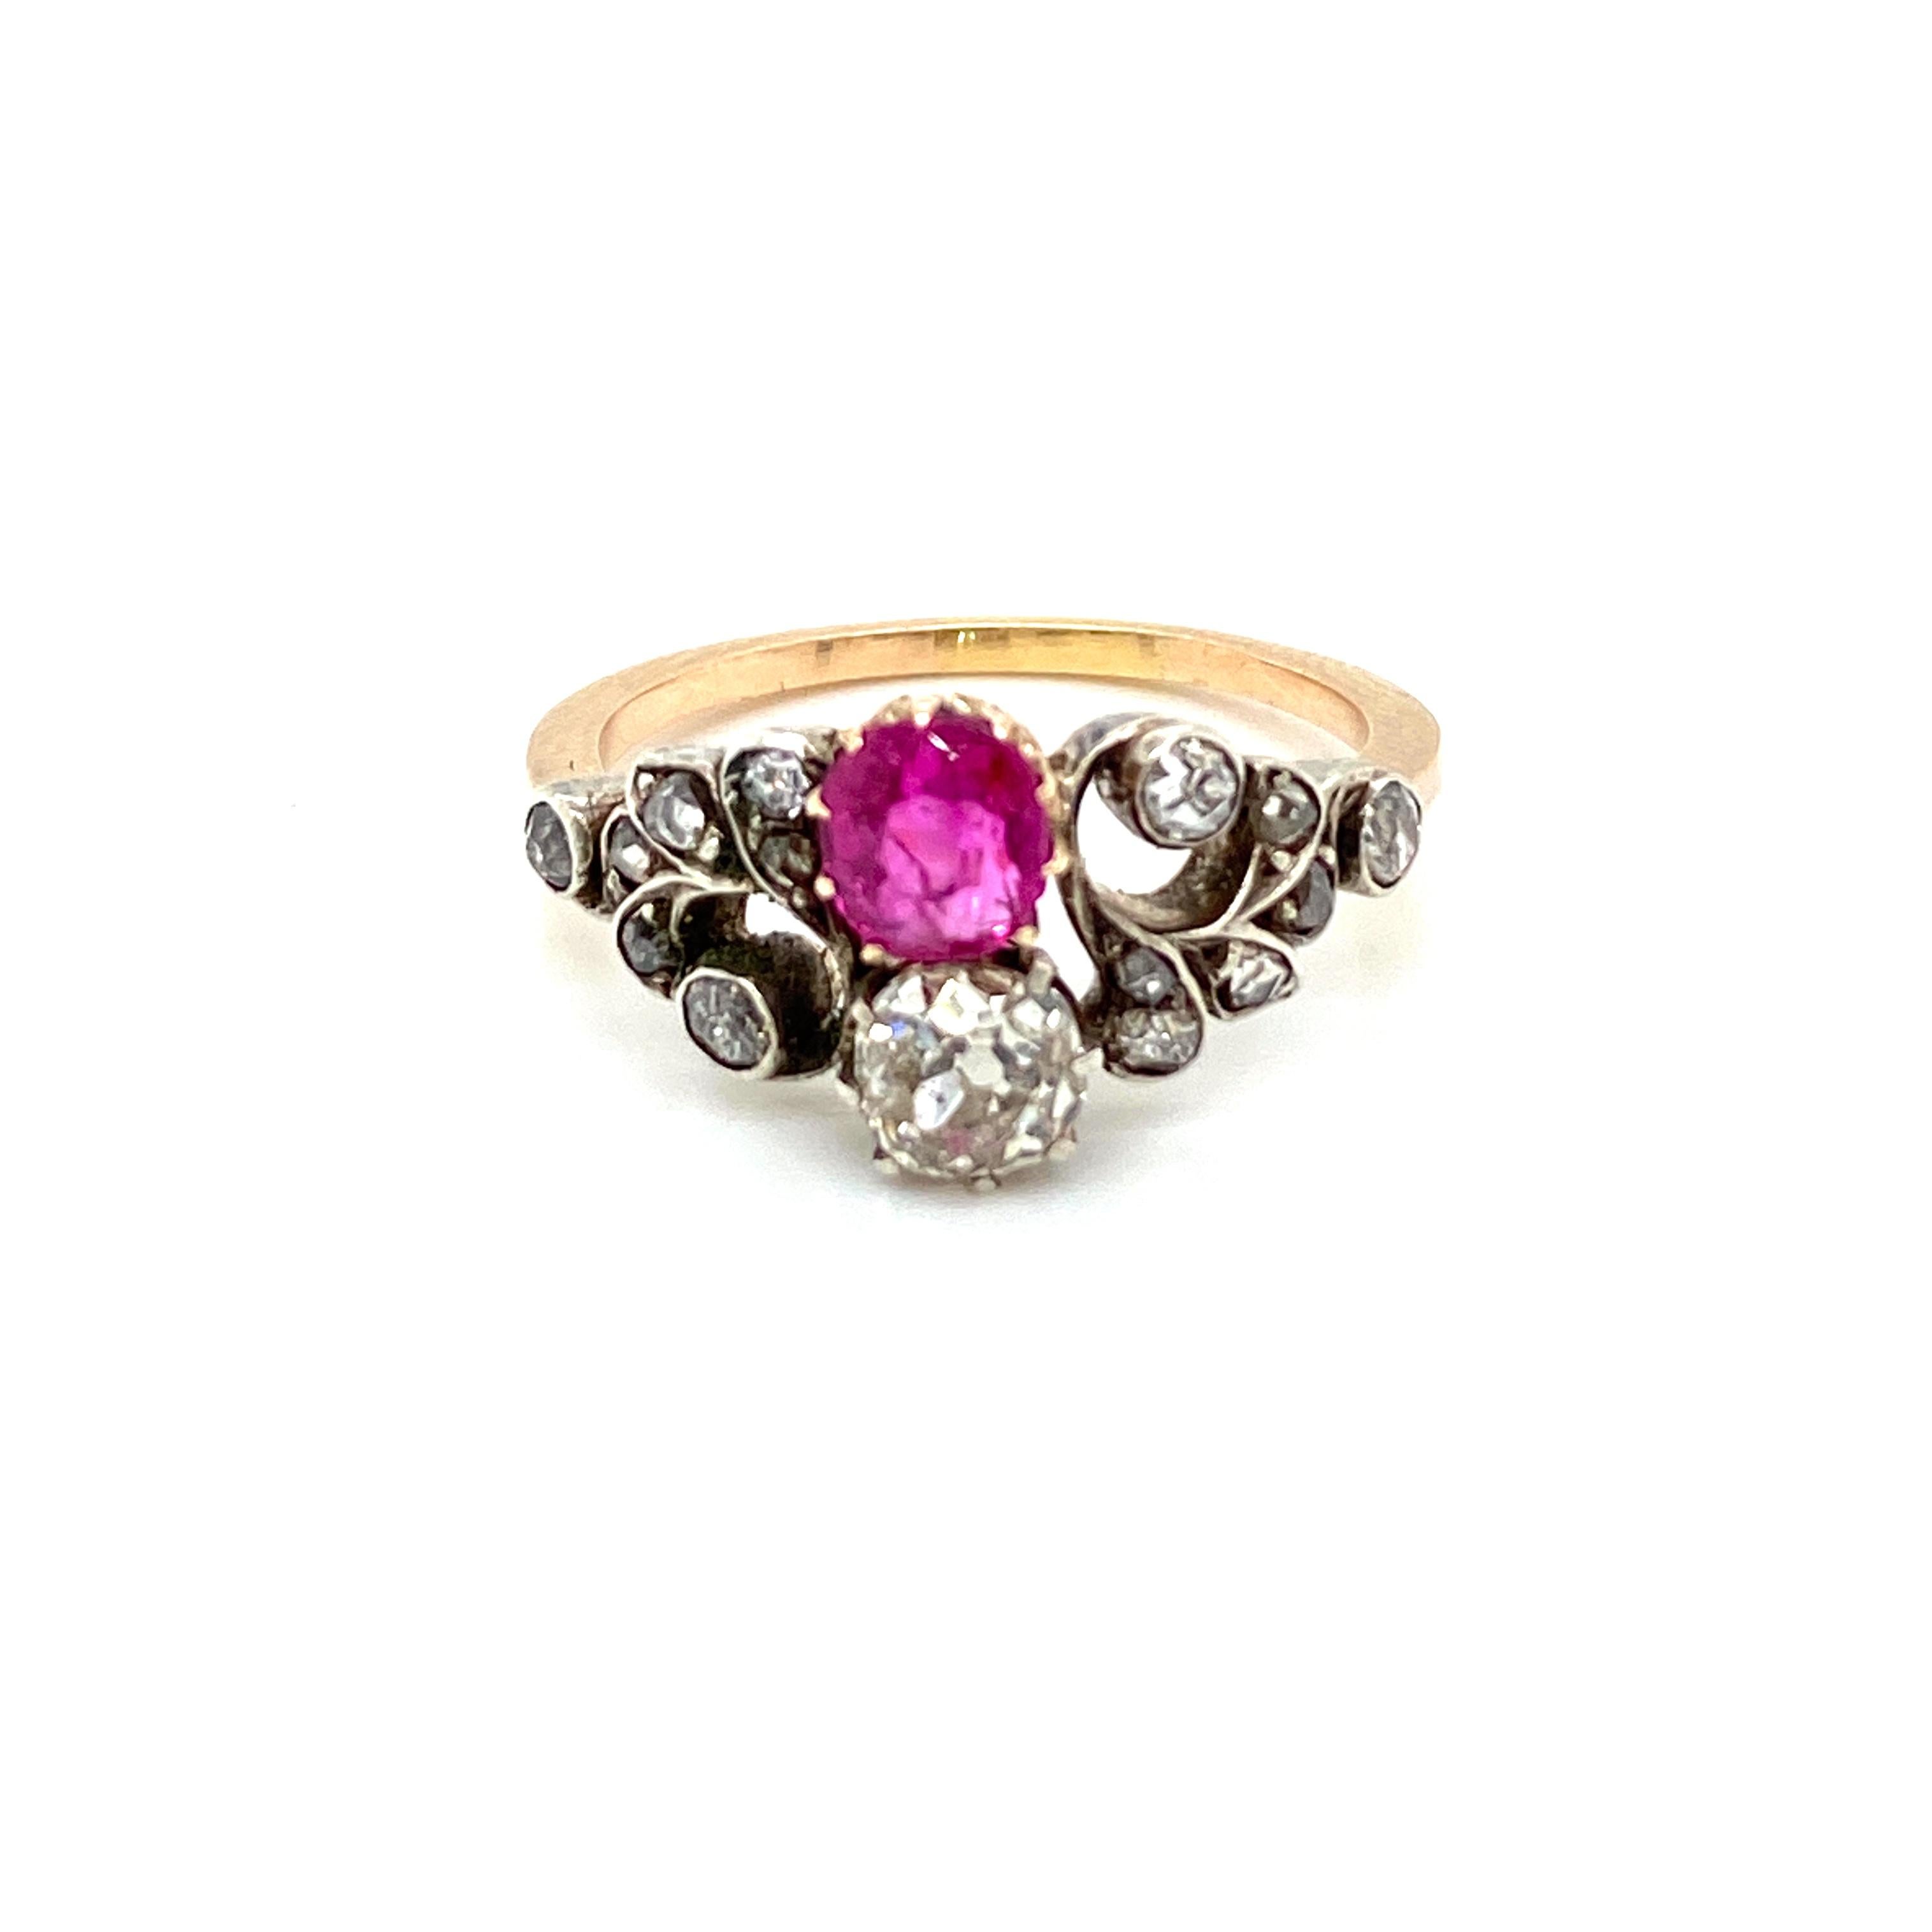 Mixed Cut Victorian Natural Unheated Ruby Diamond Vous et Moi Ring